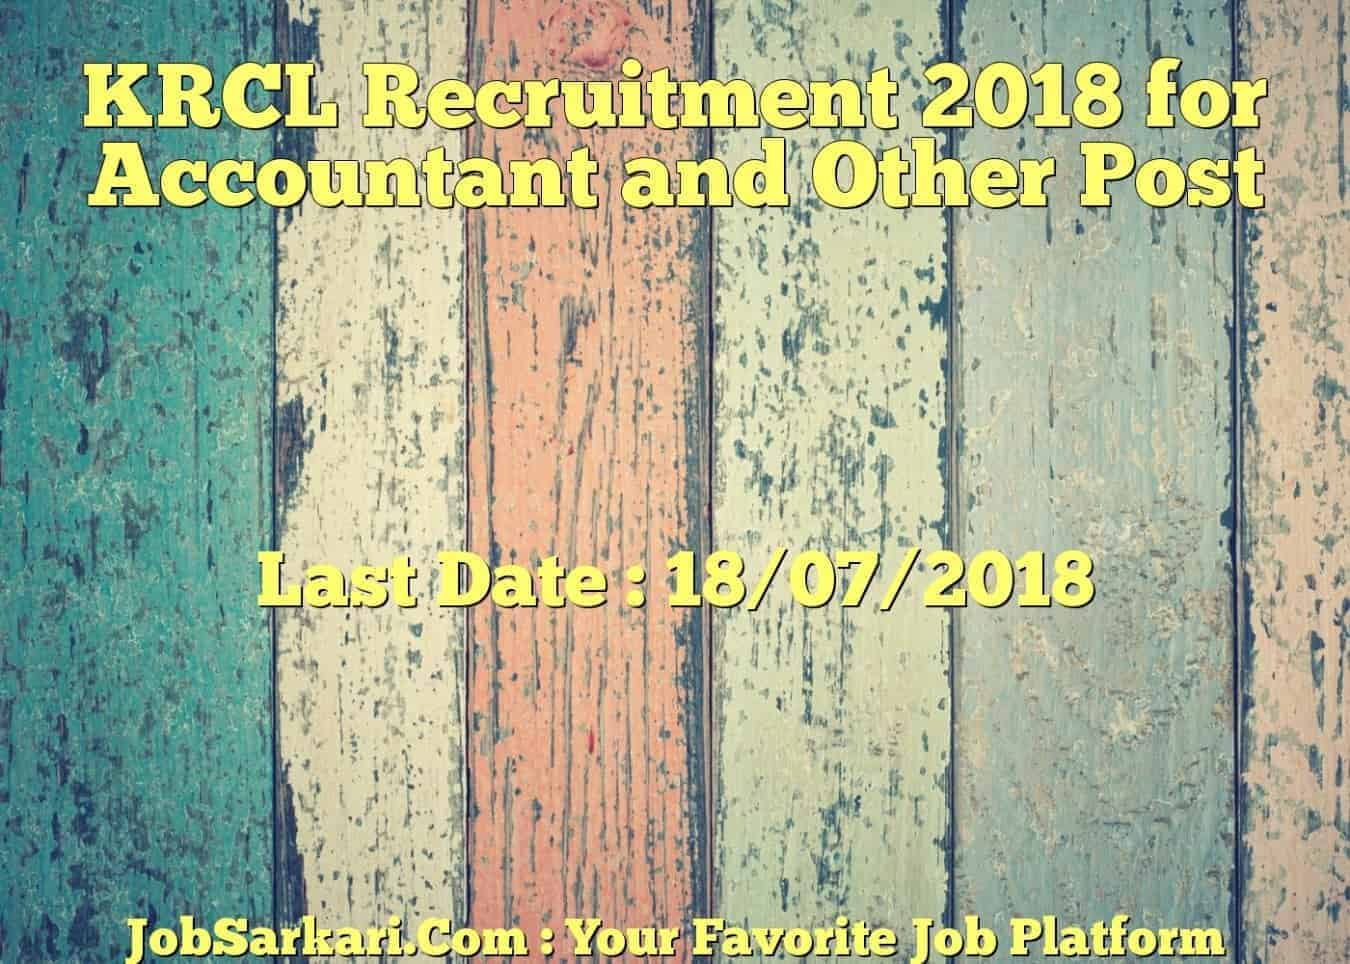 KRCL Recruitment 2018 for Accountant and Other Post